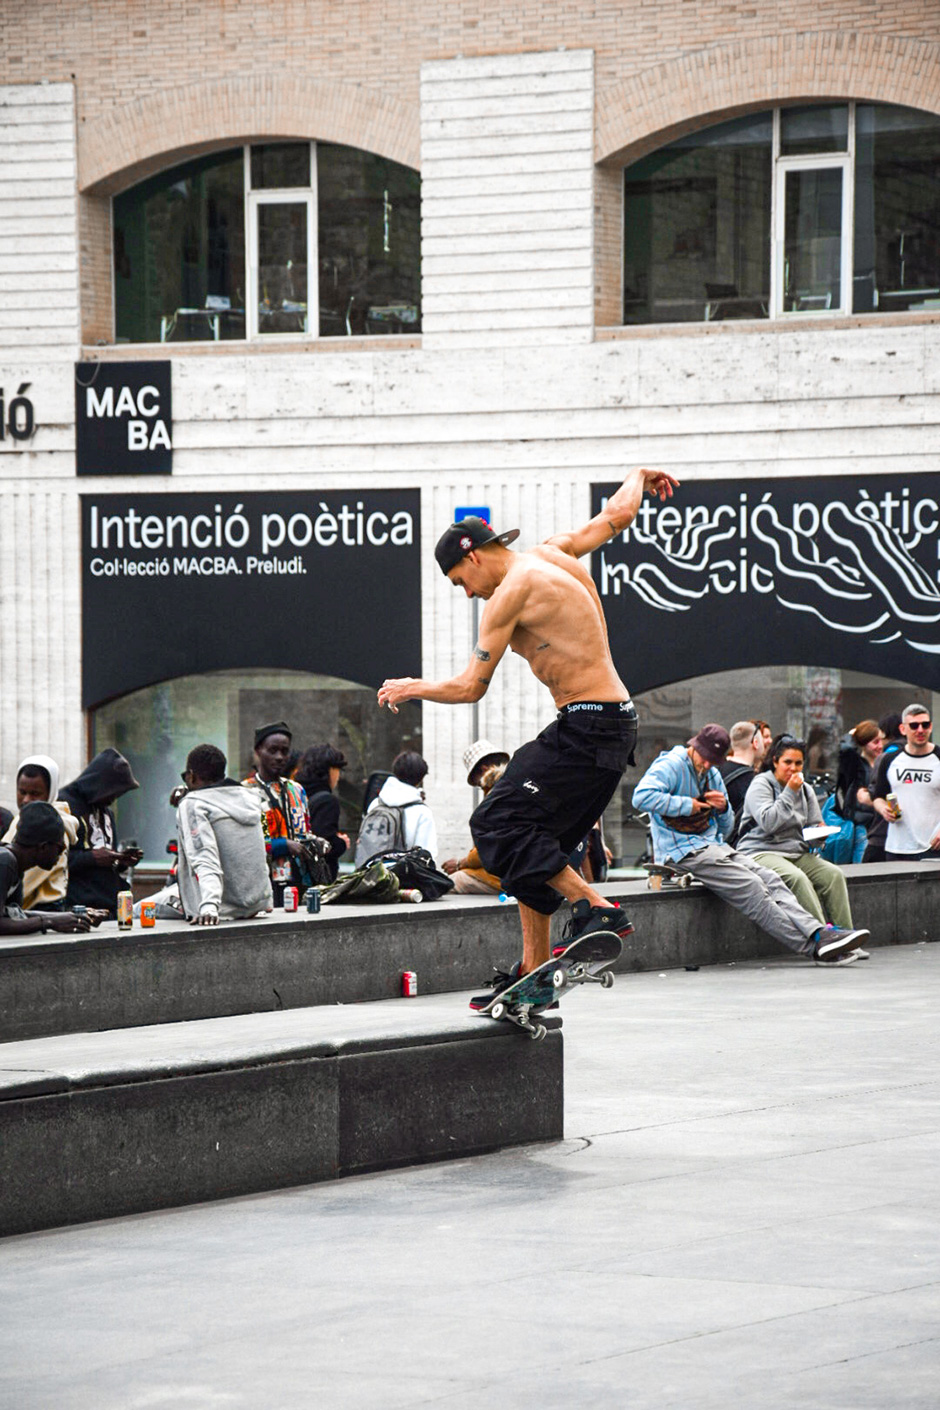 Nollie Frontside Crooked grind at MACBA. Photo by Indy Makkinje